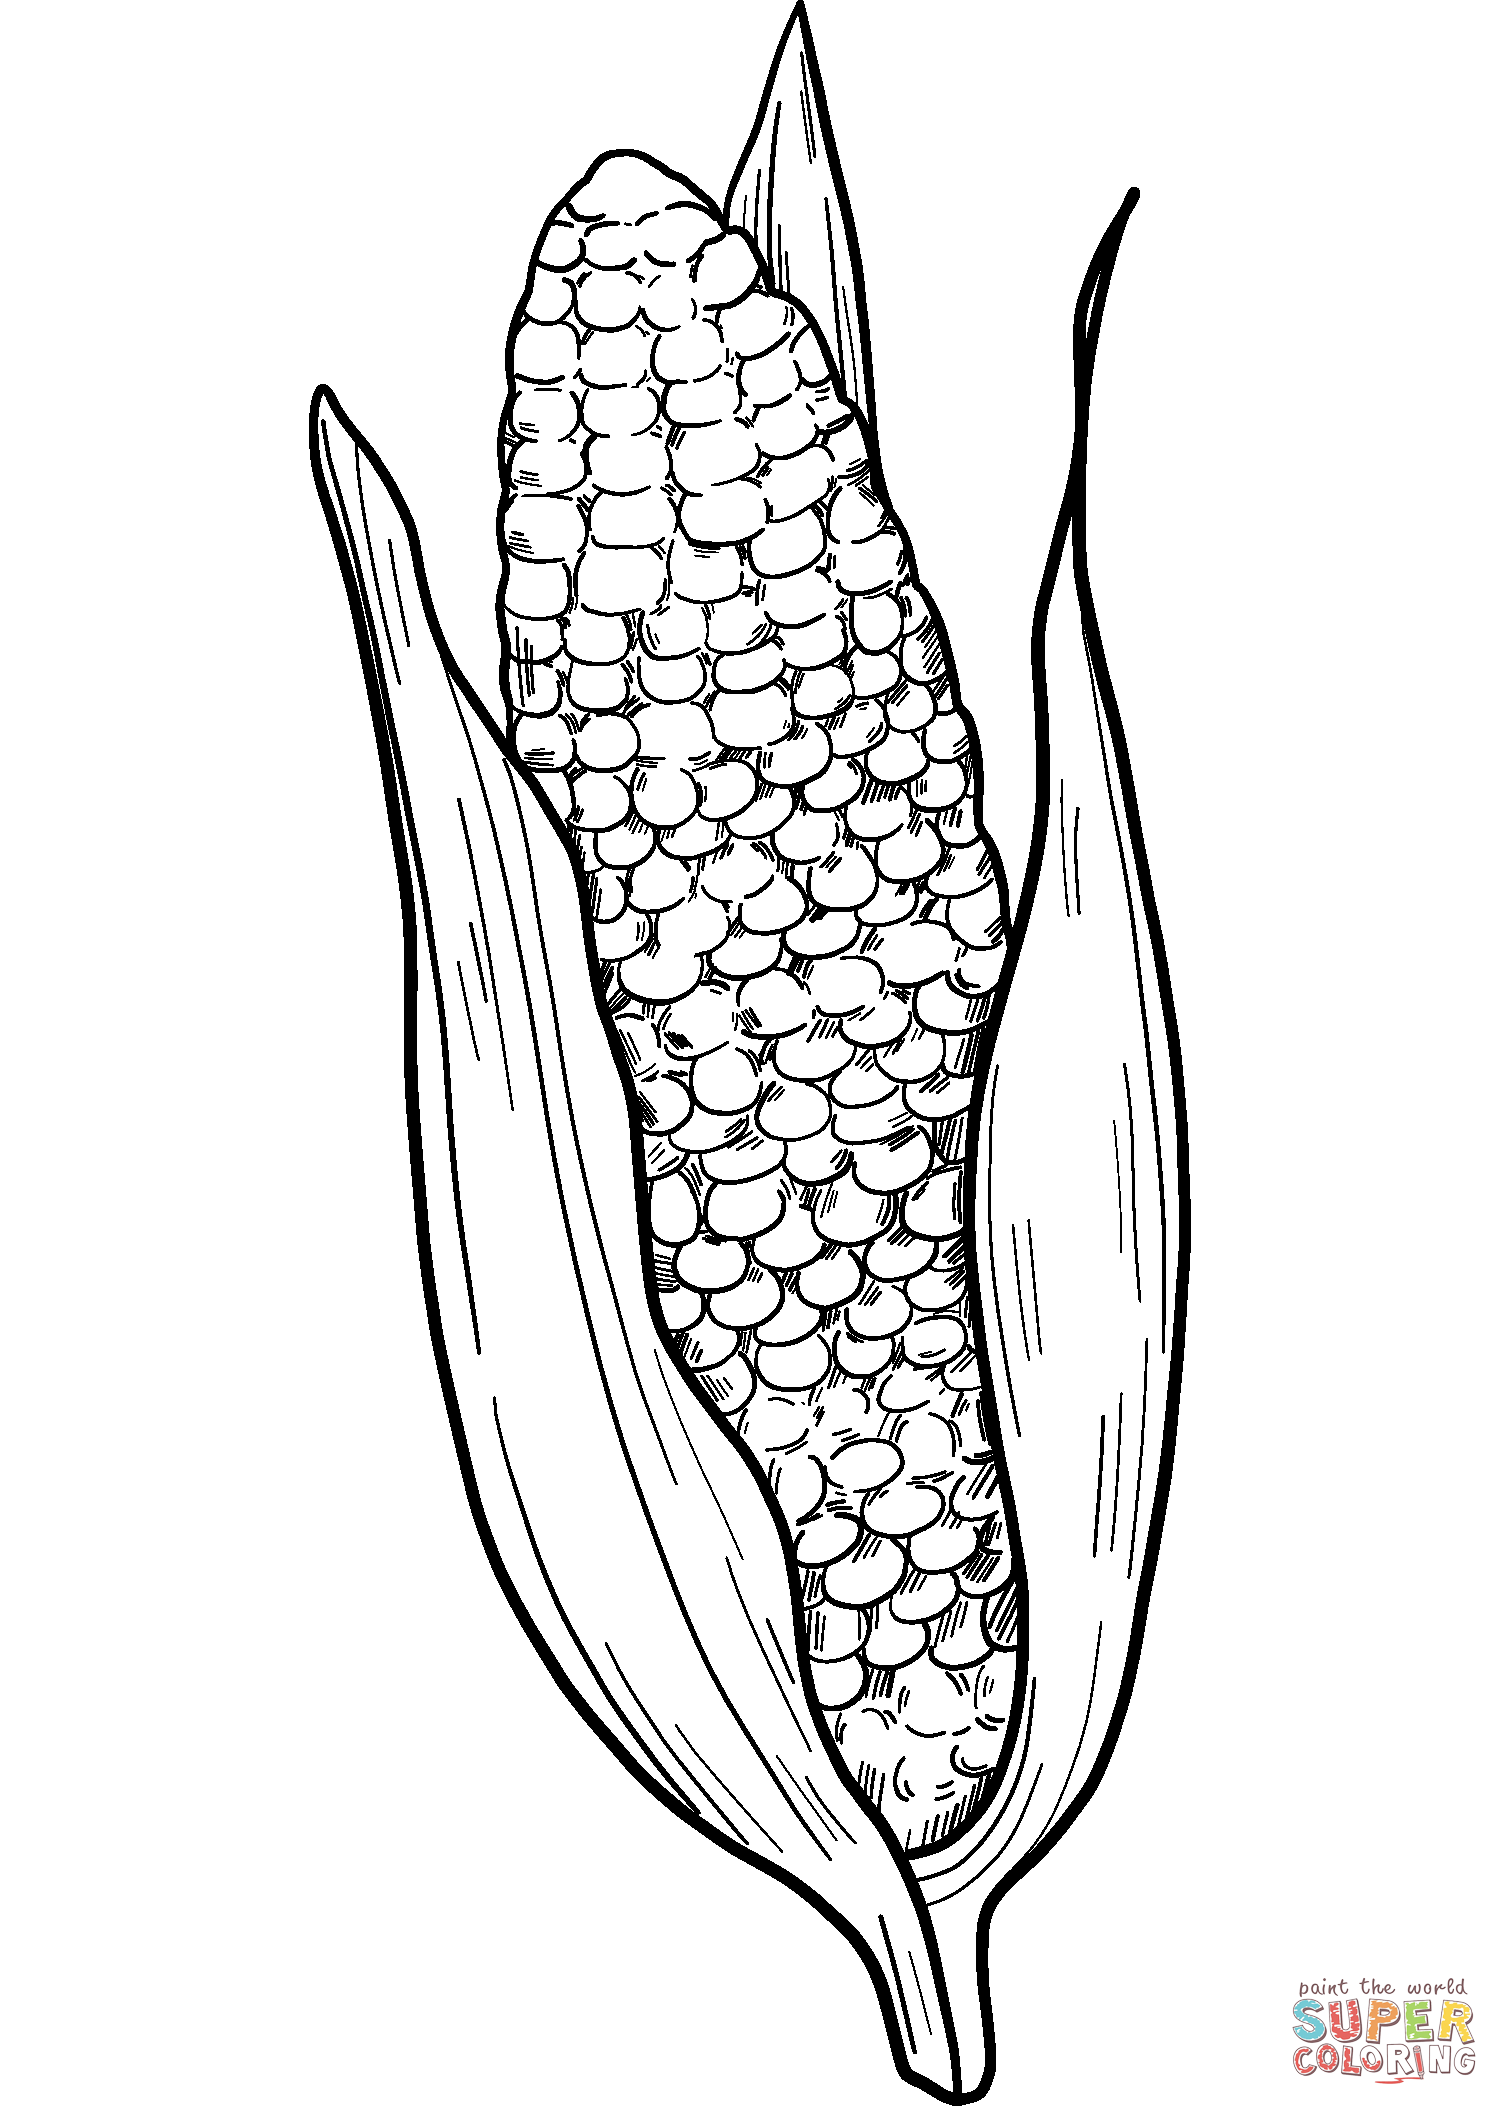 Corn cob coloring page free printable coloring pages